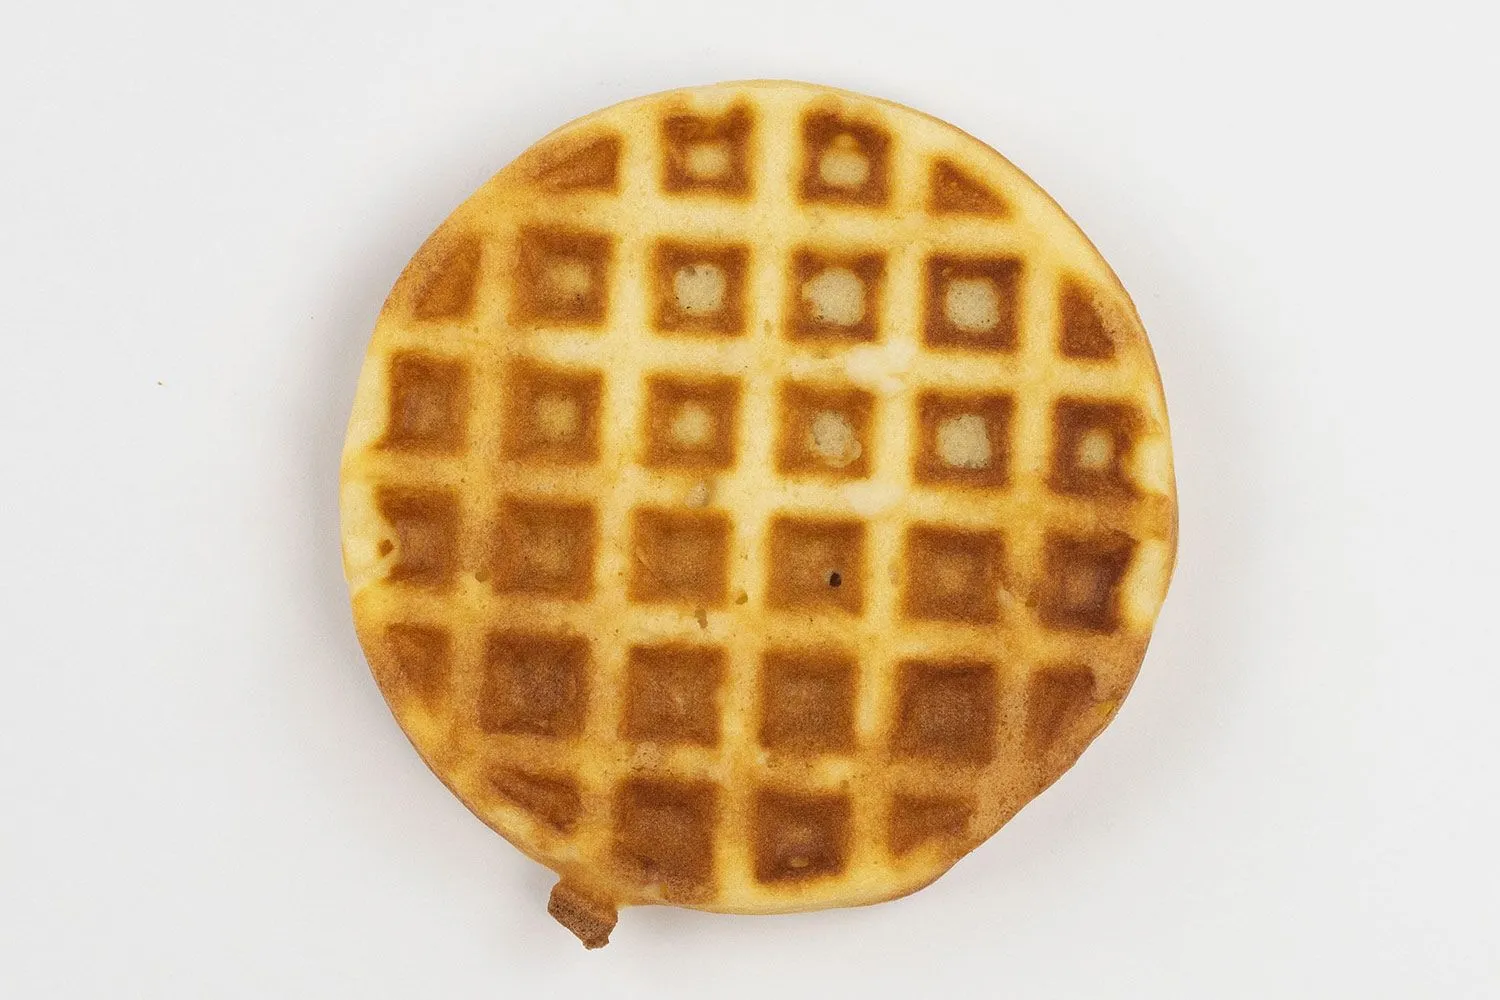 Reviewers Are Saying This Mini Waffle Maker From Dash Is the Best  Thing They've Bought